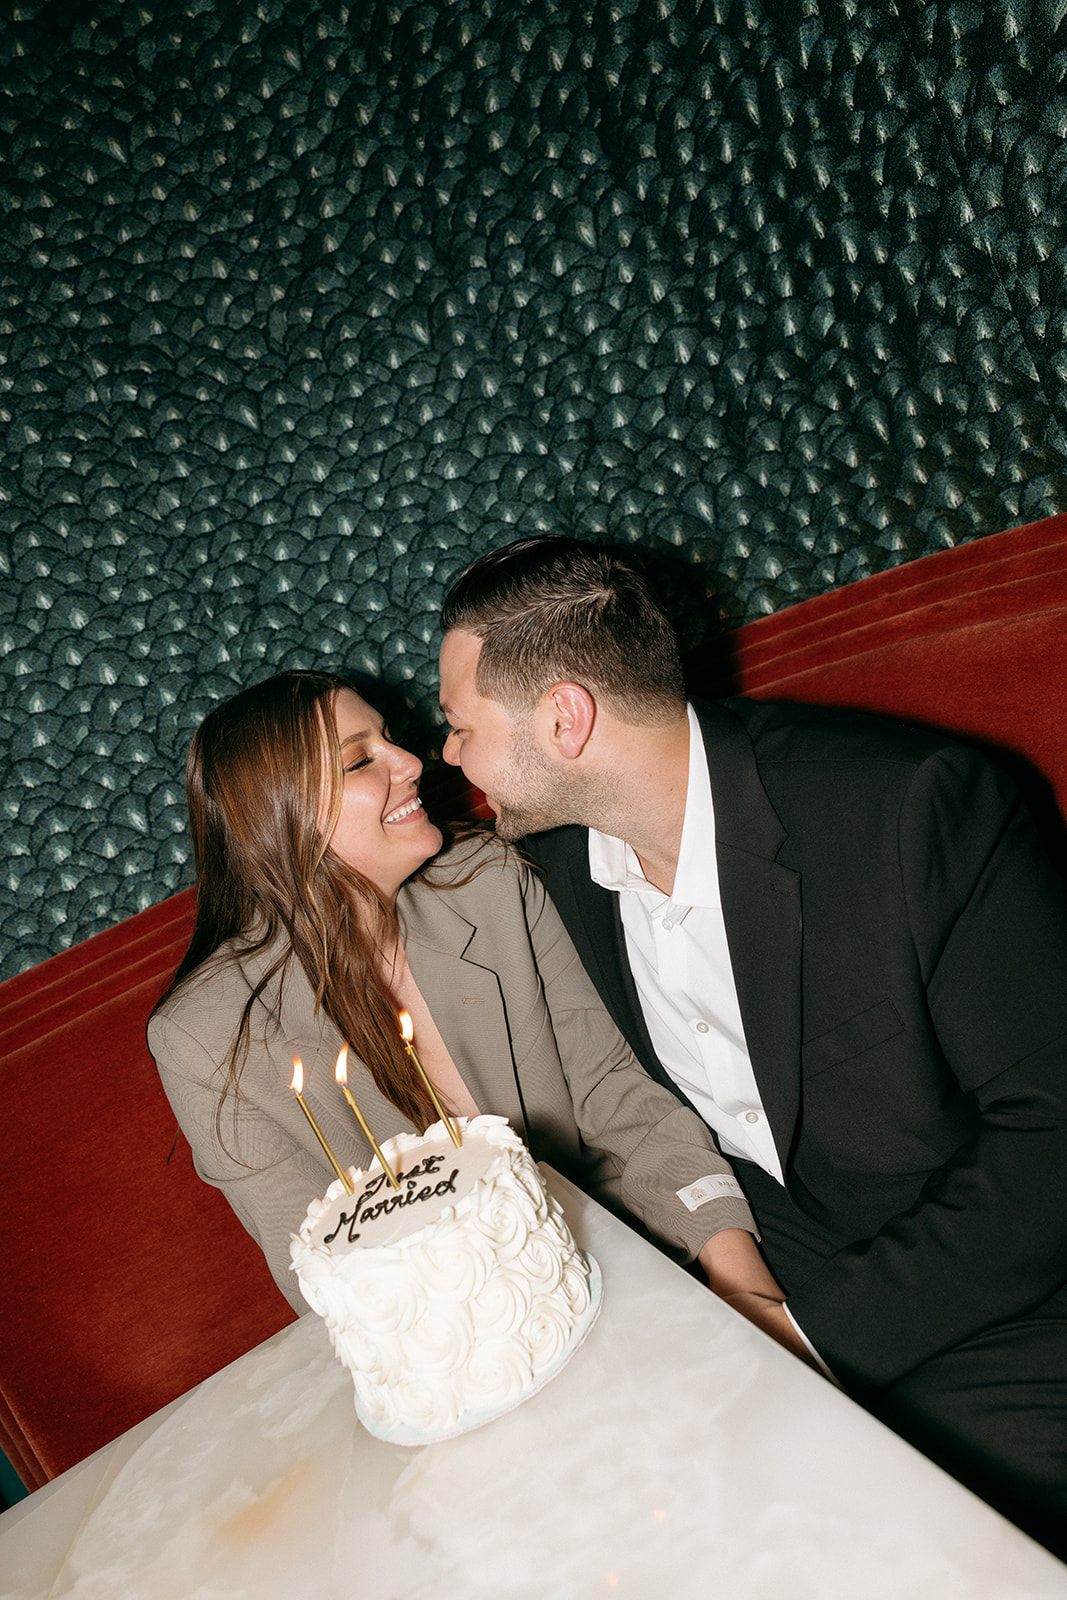 A couple who eloped in NYC blow our their mini wedding cake candles